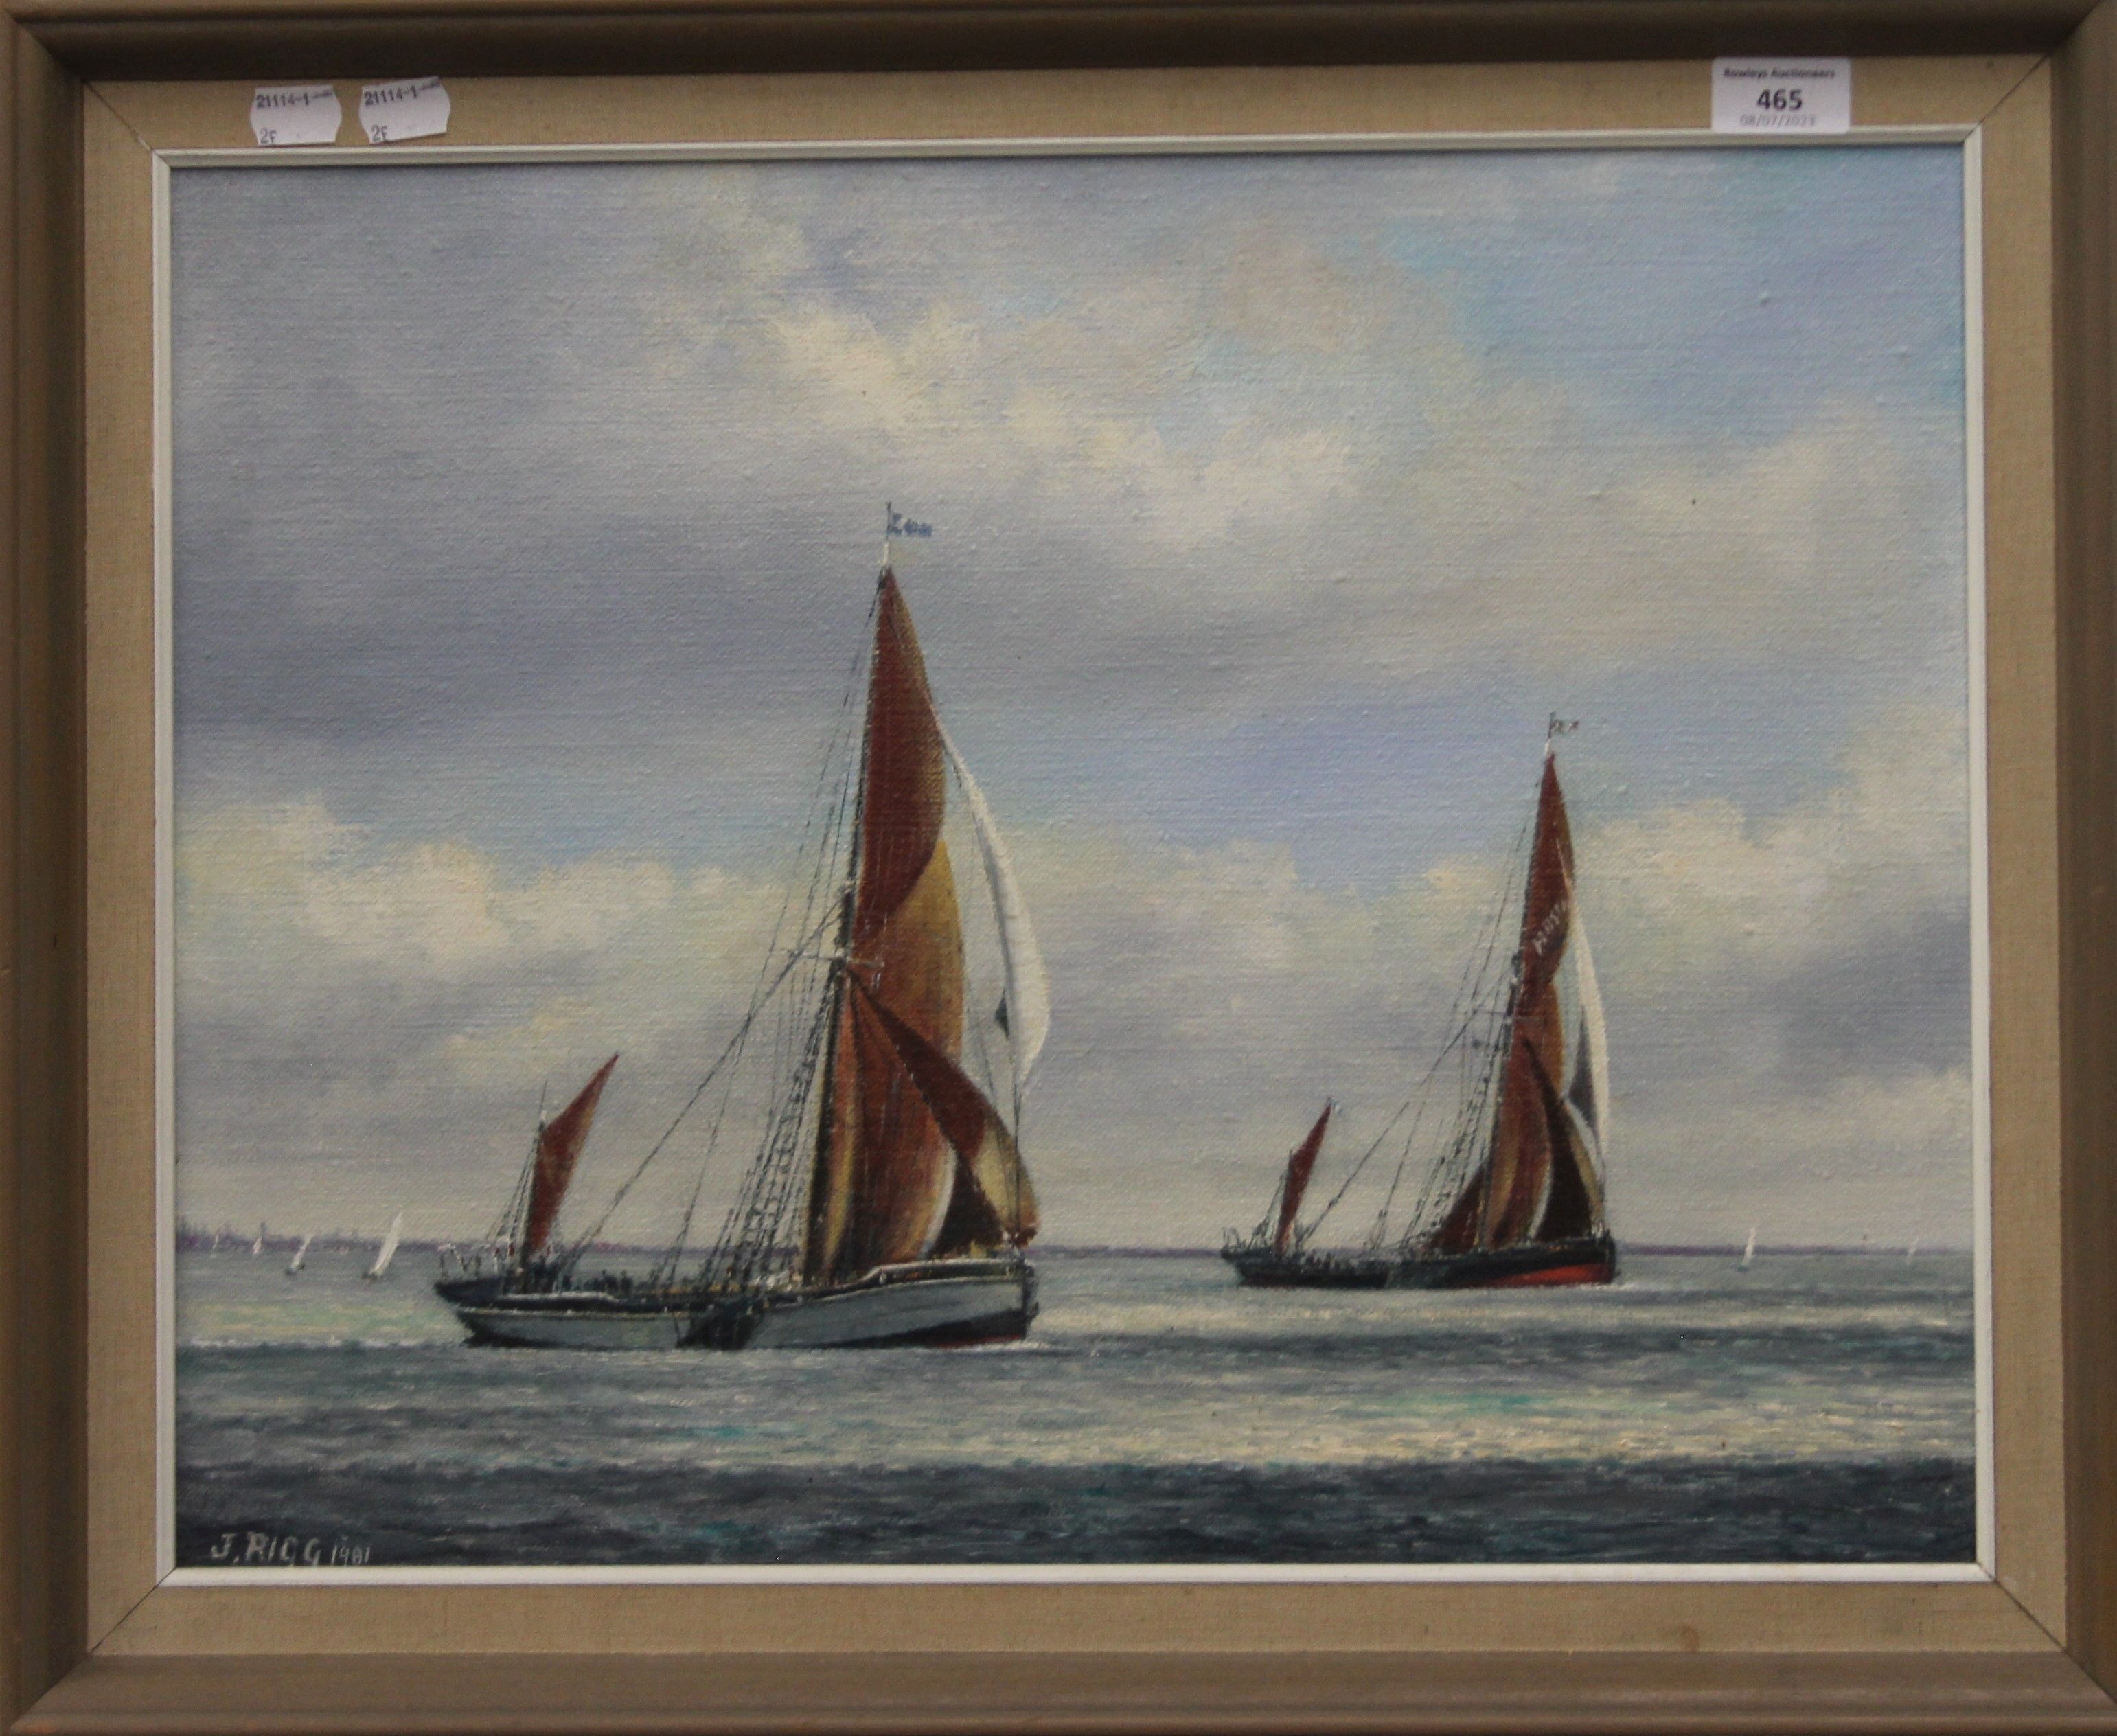 JACK RIGG (born 1927), Sailing Barges Reminder and Xylonite in Pin Mill Match 1980, oil on canvas, - Image 2 of 3